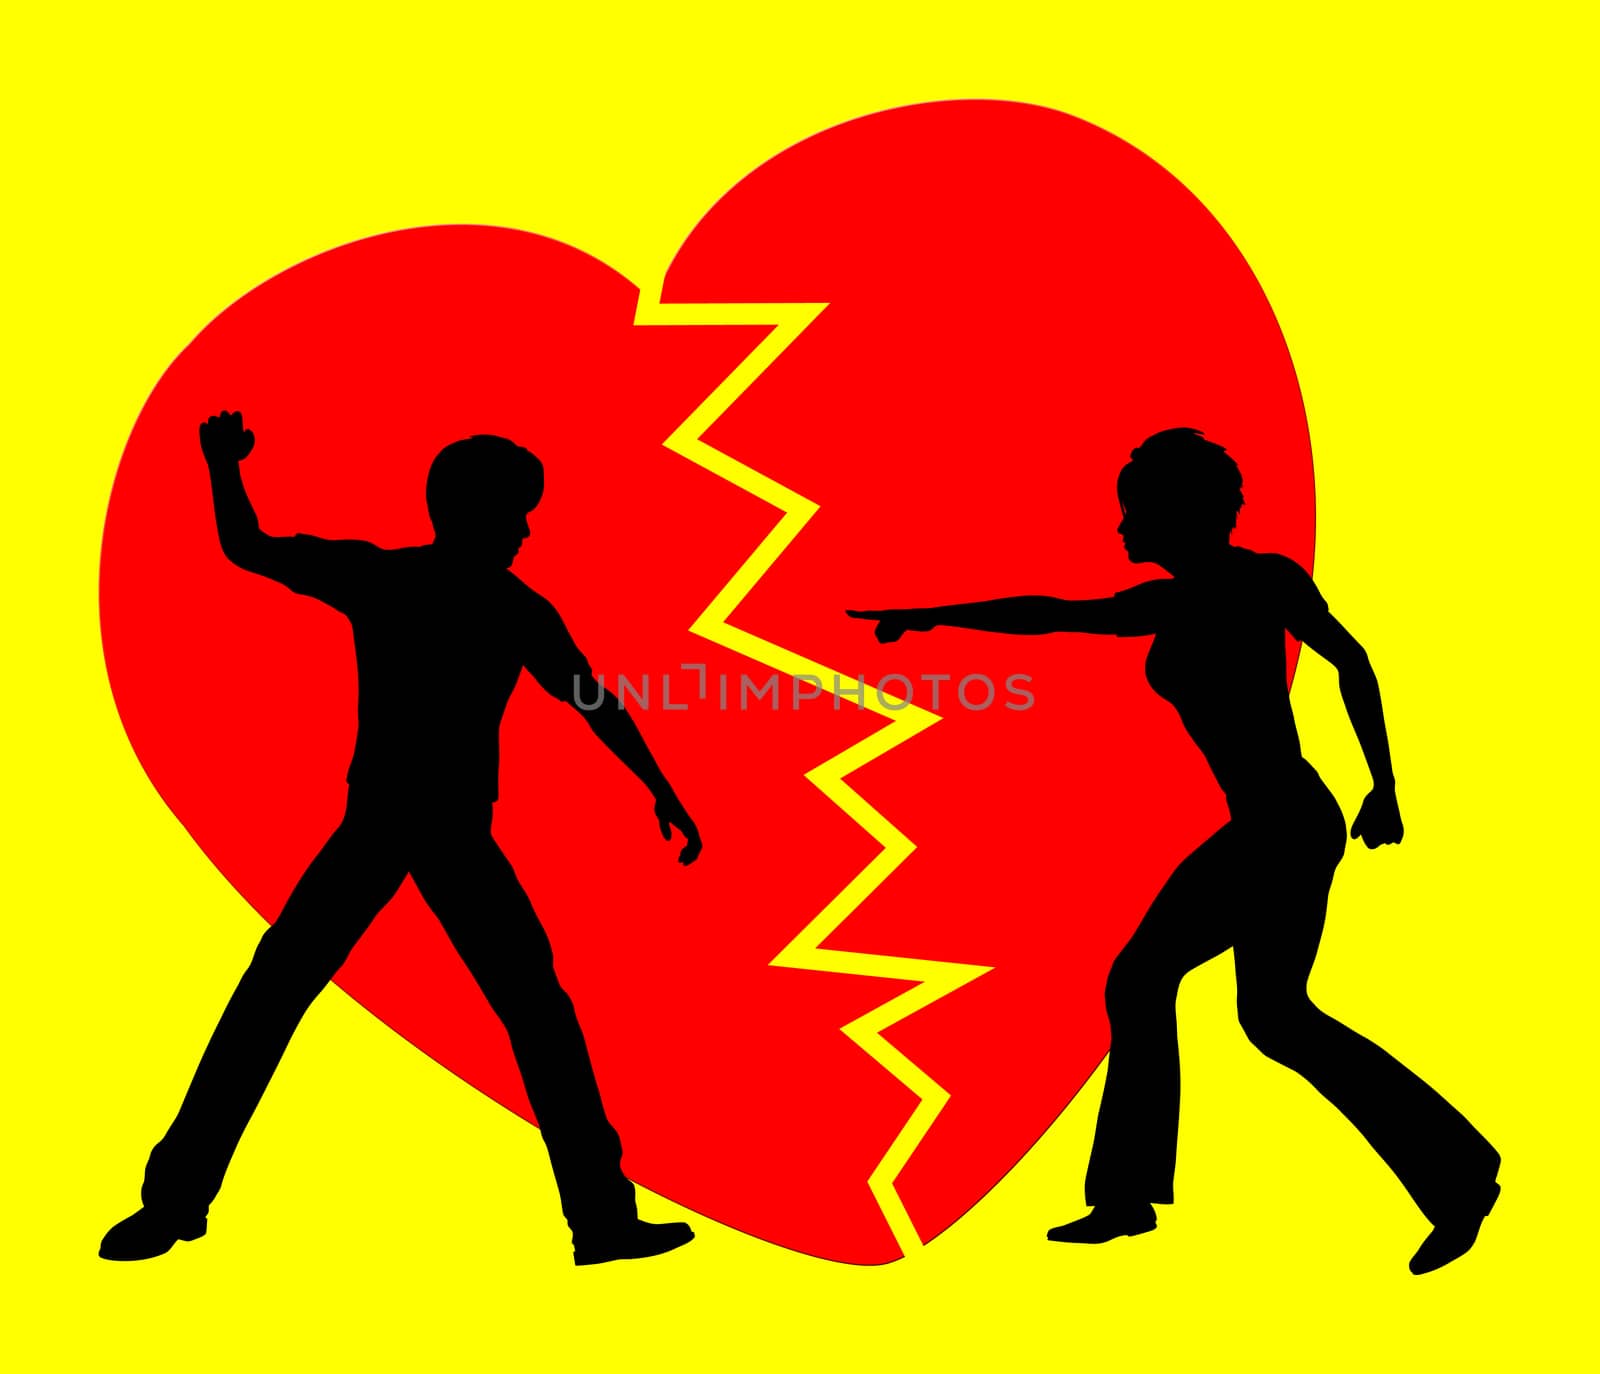 Concept sign of a couple breaking off the relation since love turned into violence and rancor